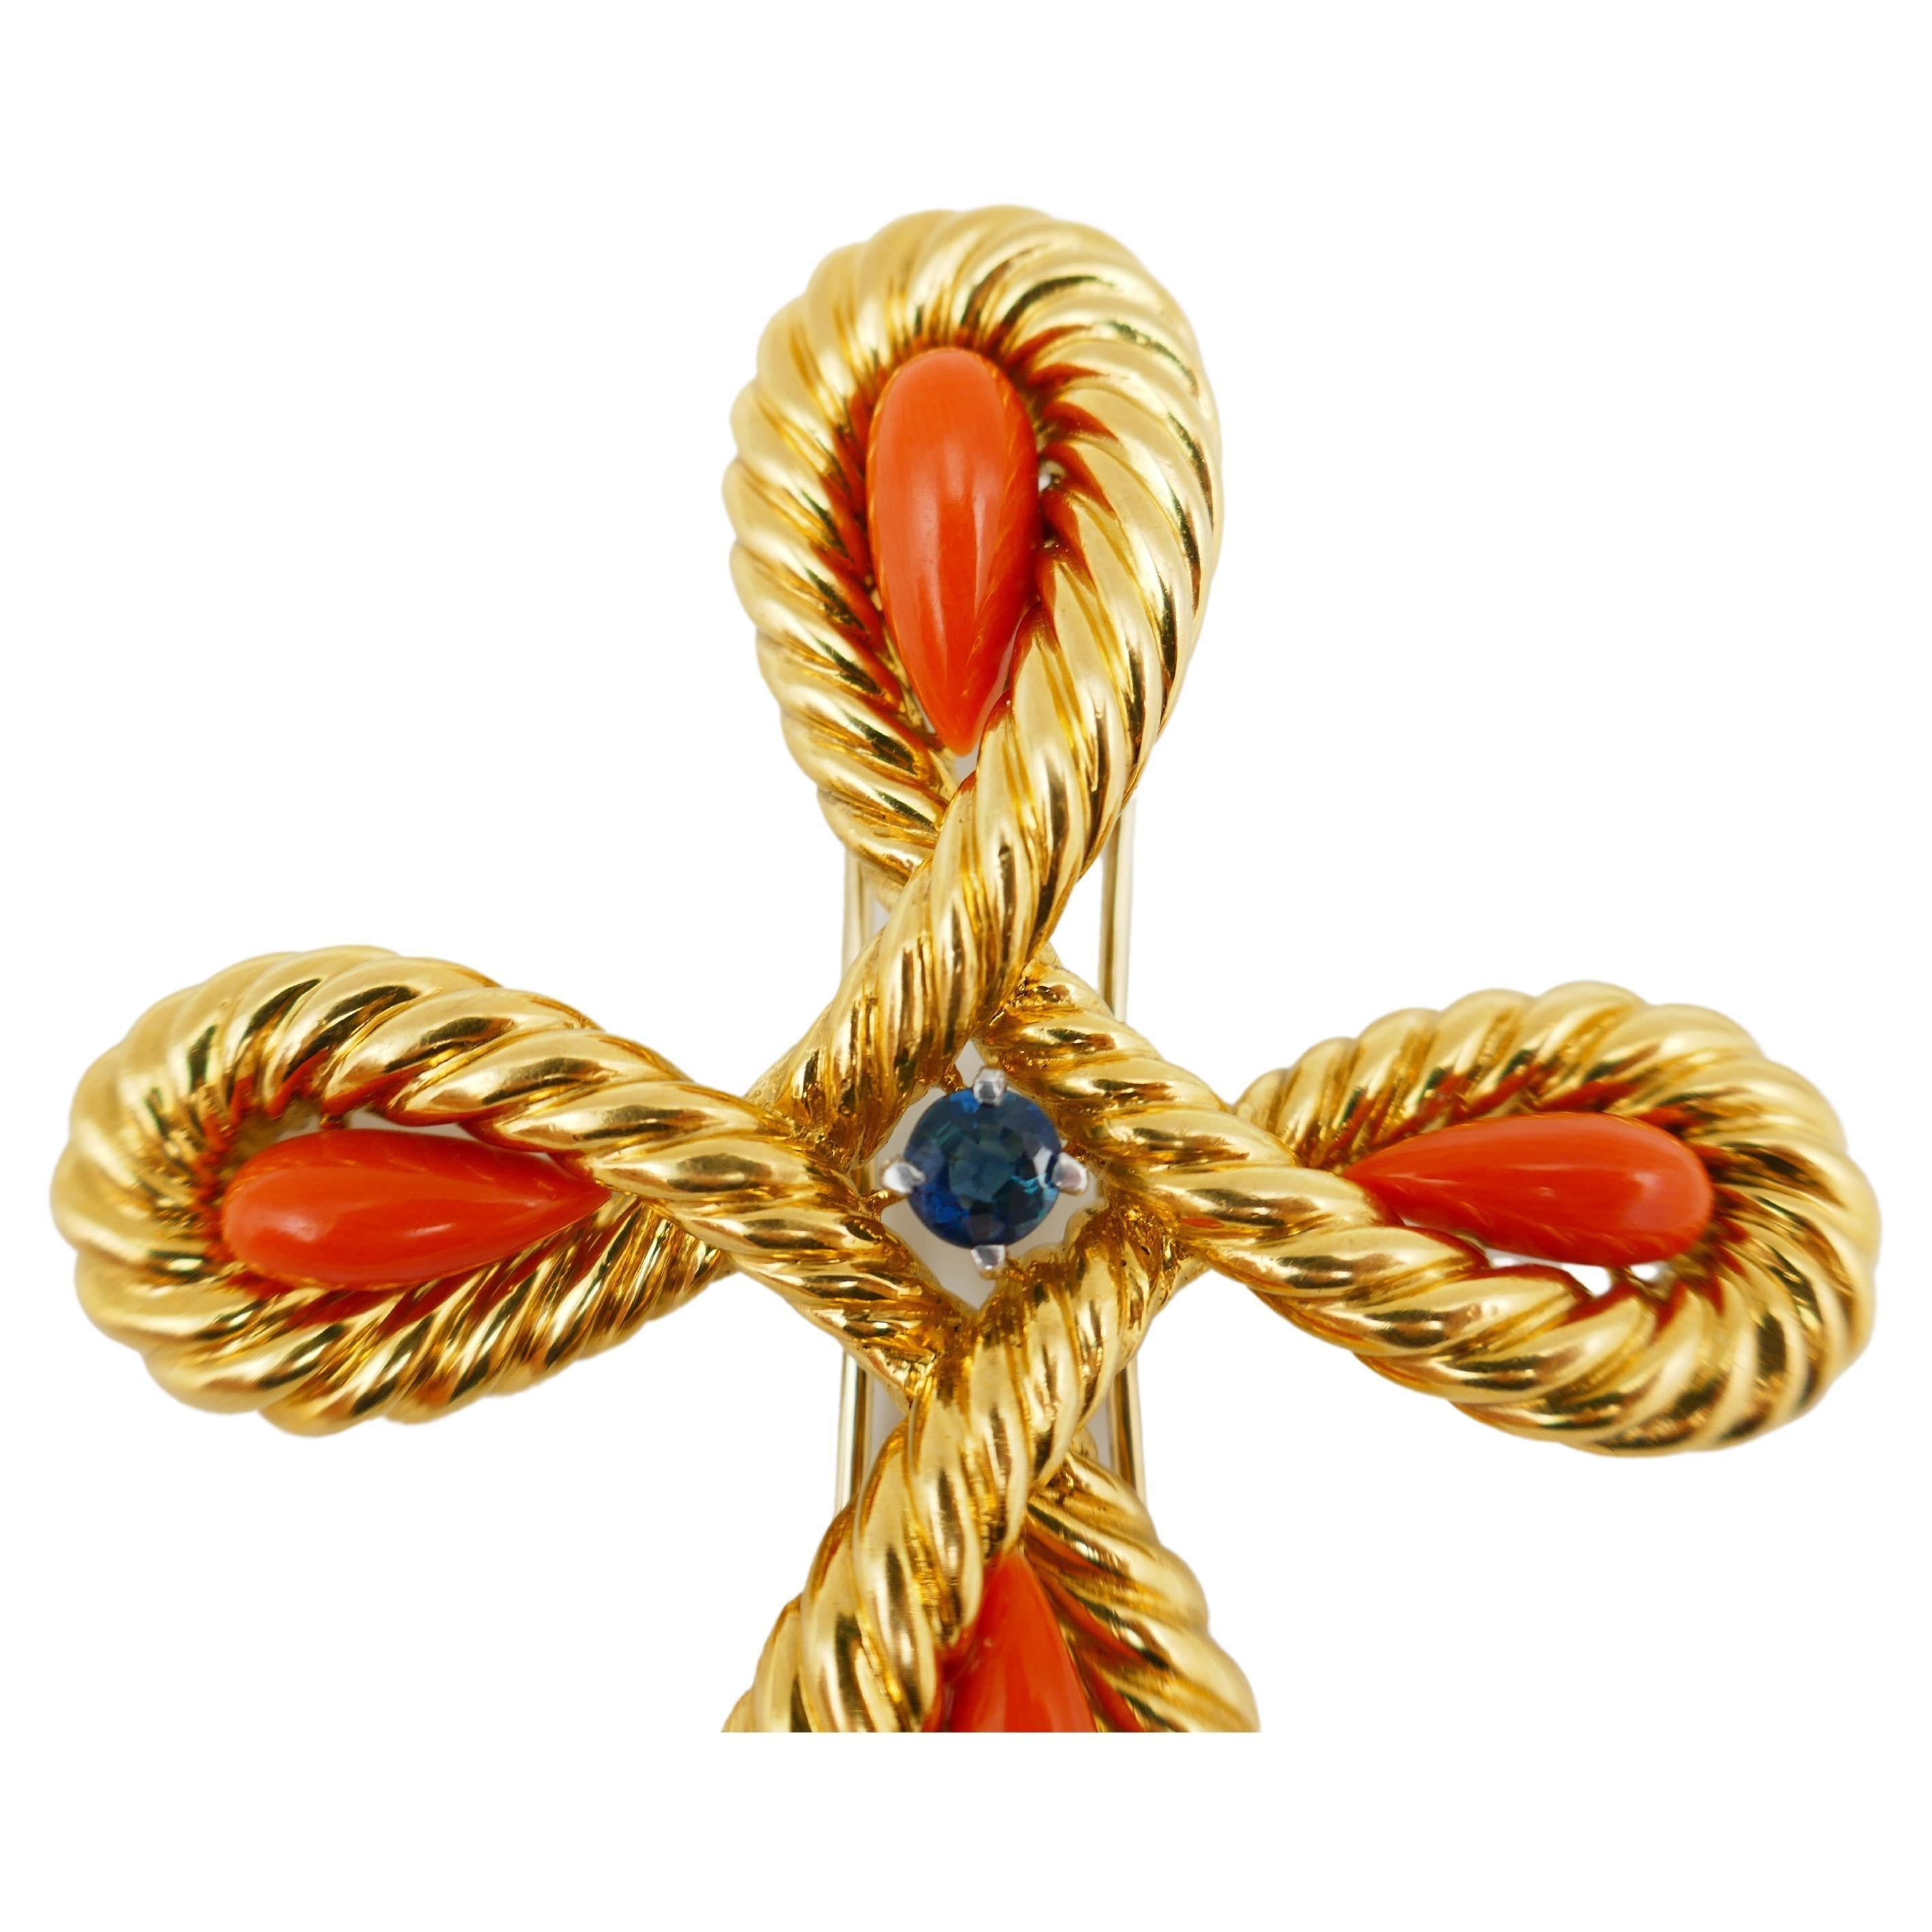 An impressive vintage piece by Van Cleef & Arpels. A brooch/pendant made of 18k yellow braided gold, cabochon coral and sapphire. The bail and pin sticks have a releasing mechanism on the back of the brooch (see close-up photos). 
Stamped with VCA